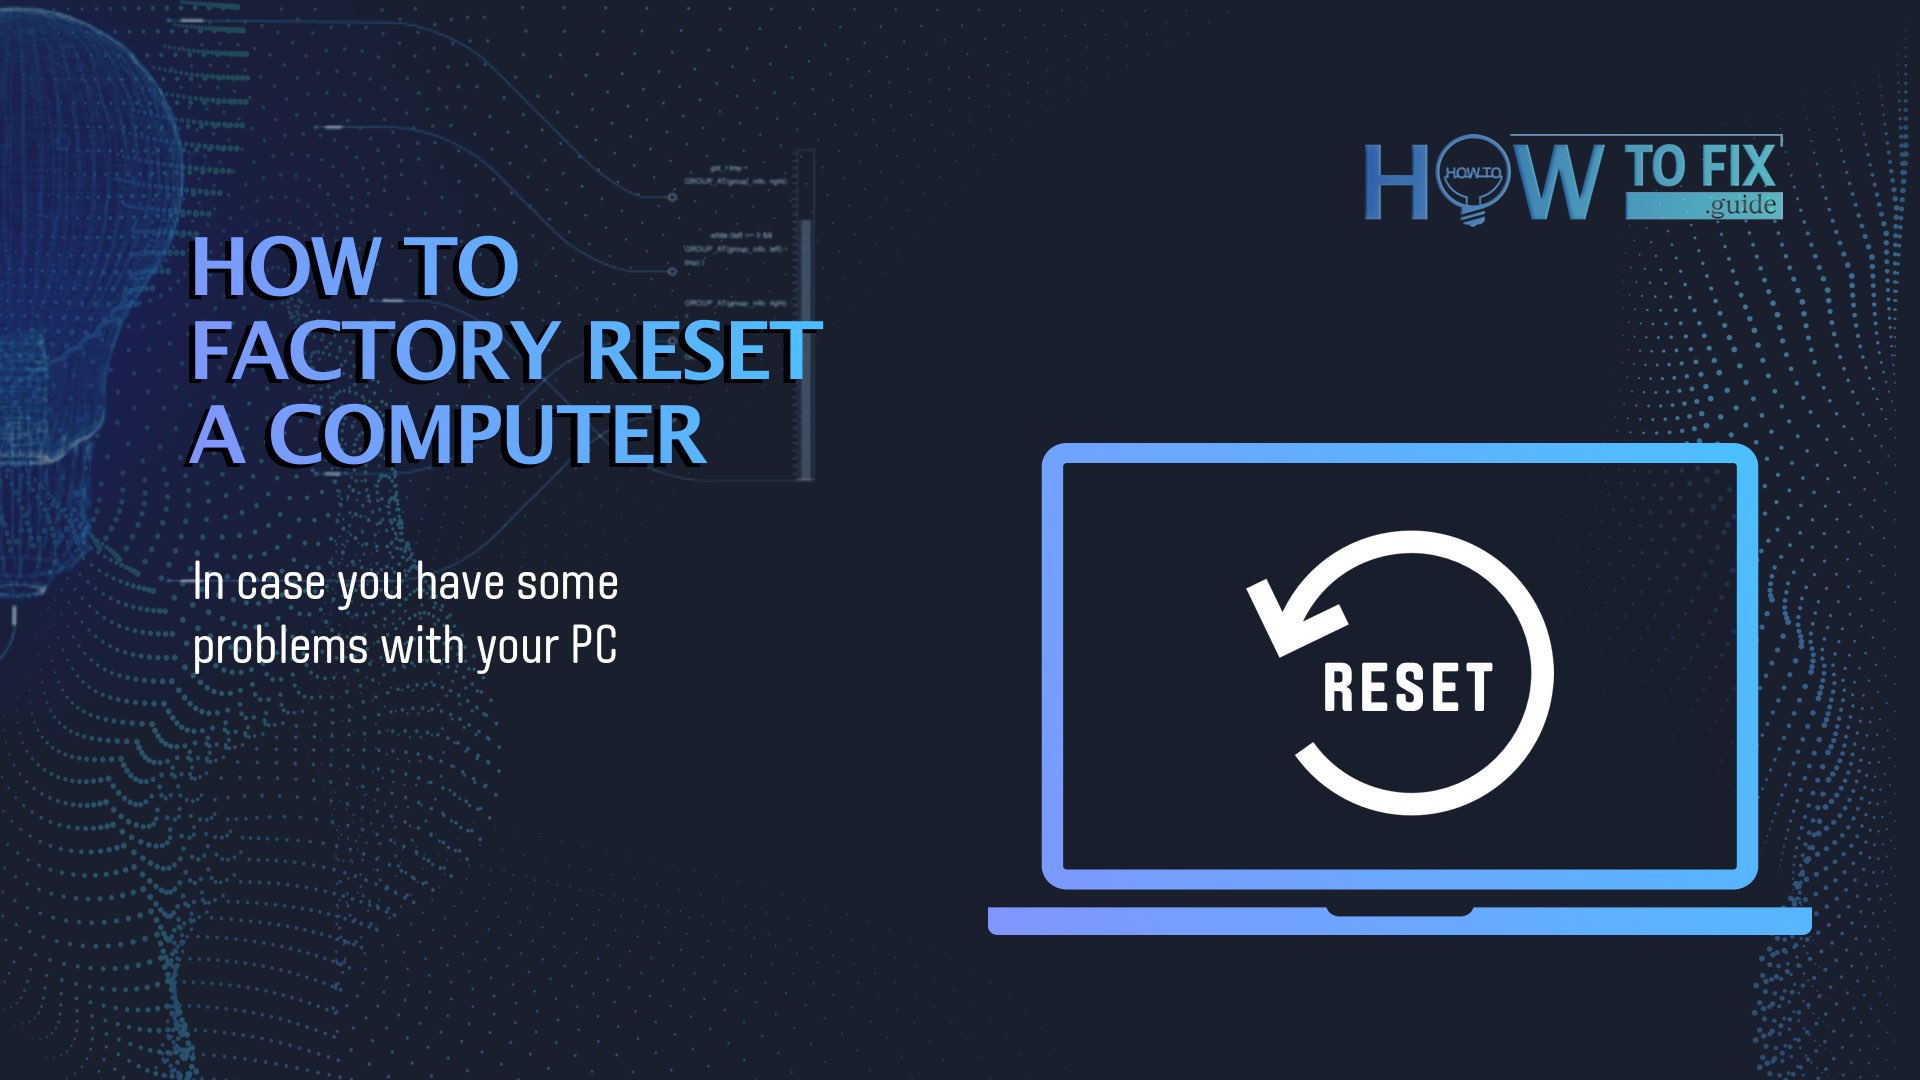 How to Factory Reset a Computer